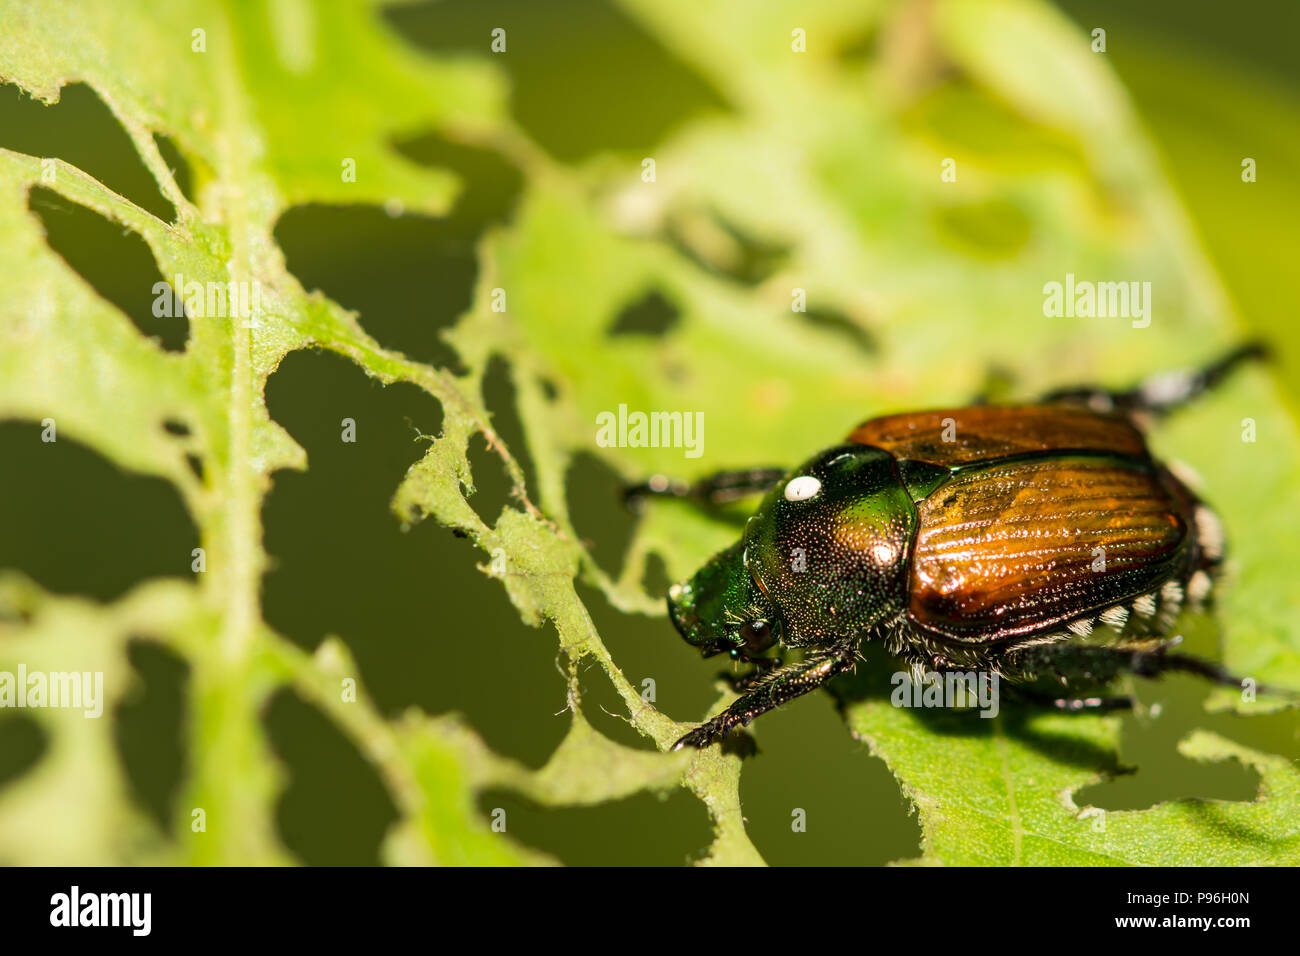 A Japanese Beetle with a Tachinid Fly egg on the thorax. Stock Photo